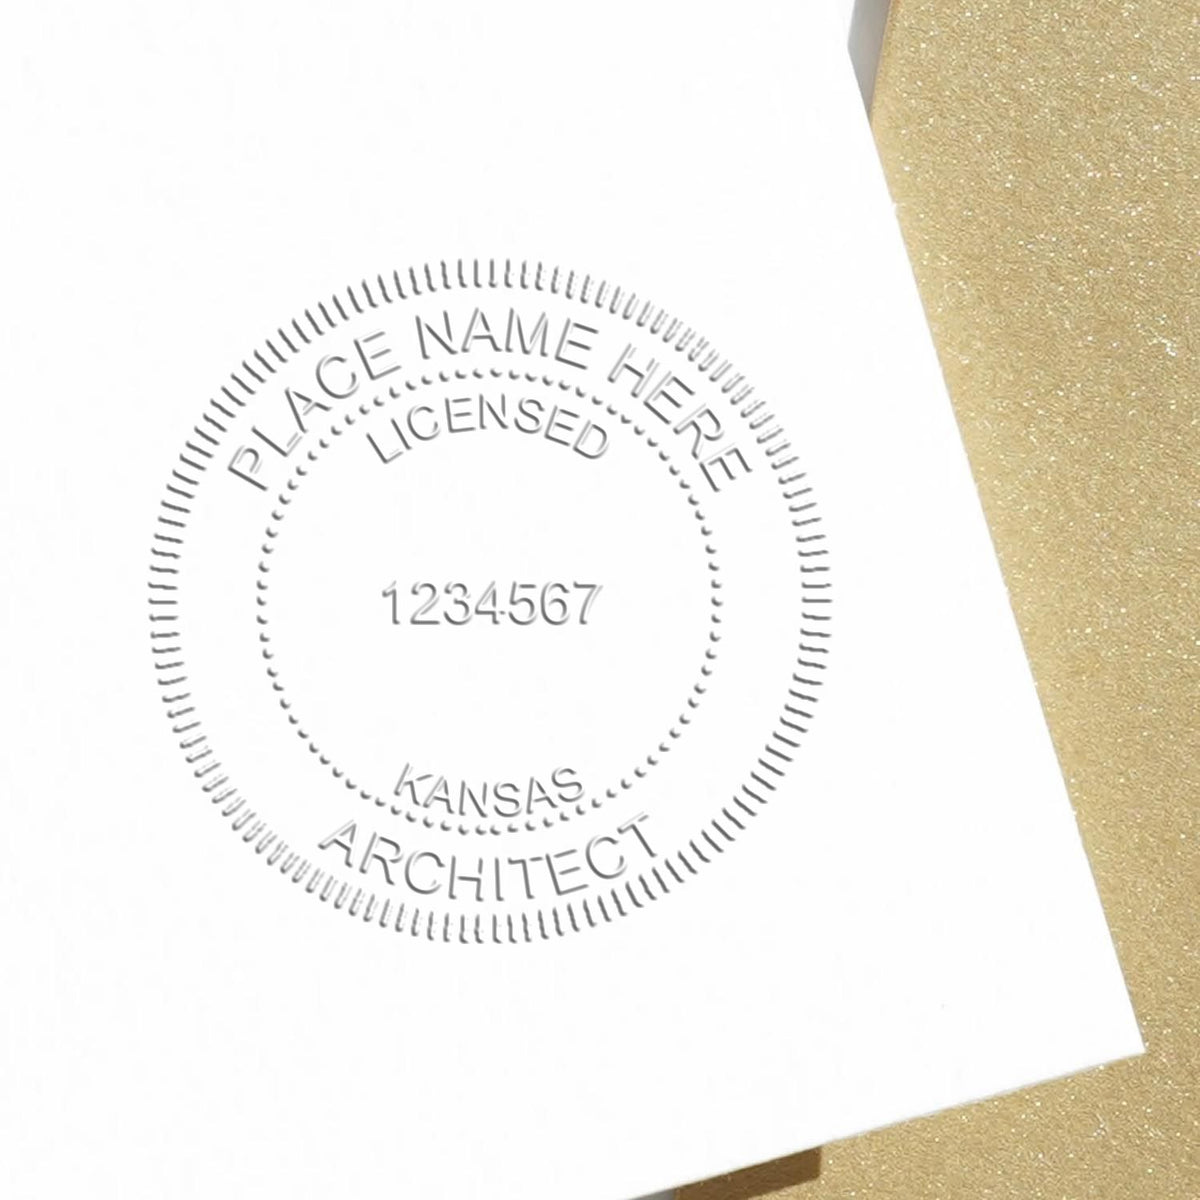 This paper is stamped with a sample imprint of the Extended Long Reach Kansas Architect Seal Embosser, signifying its quality and reliability.